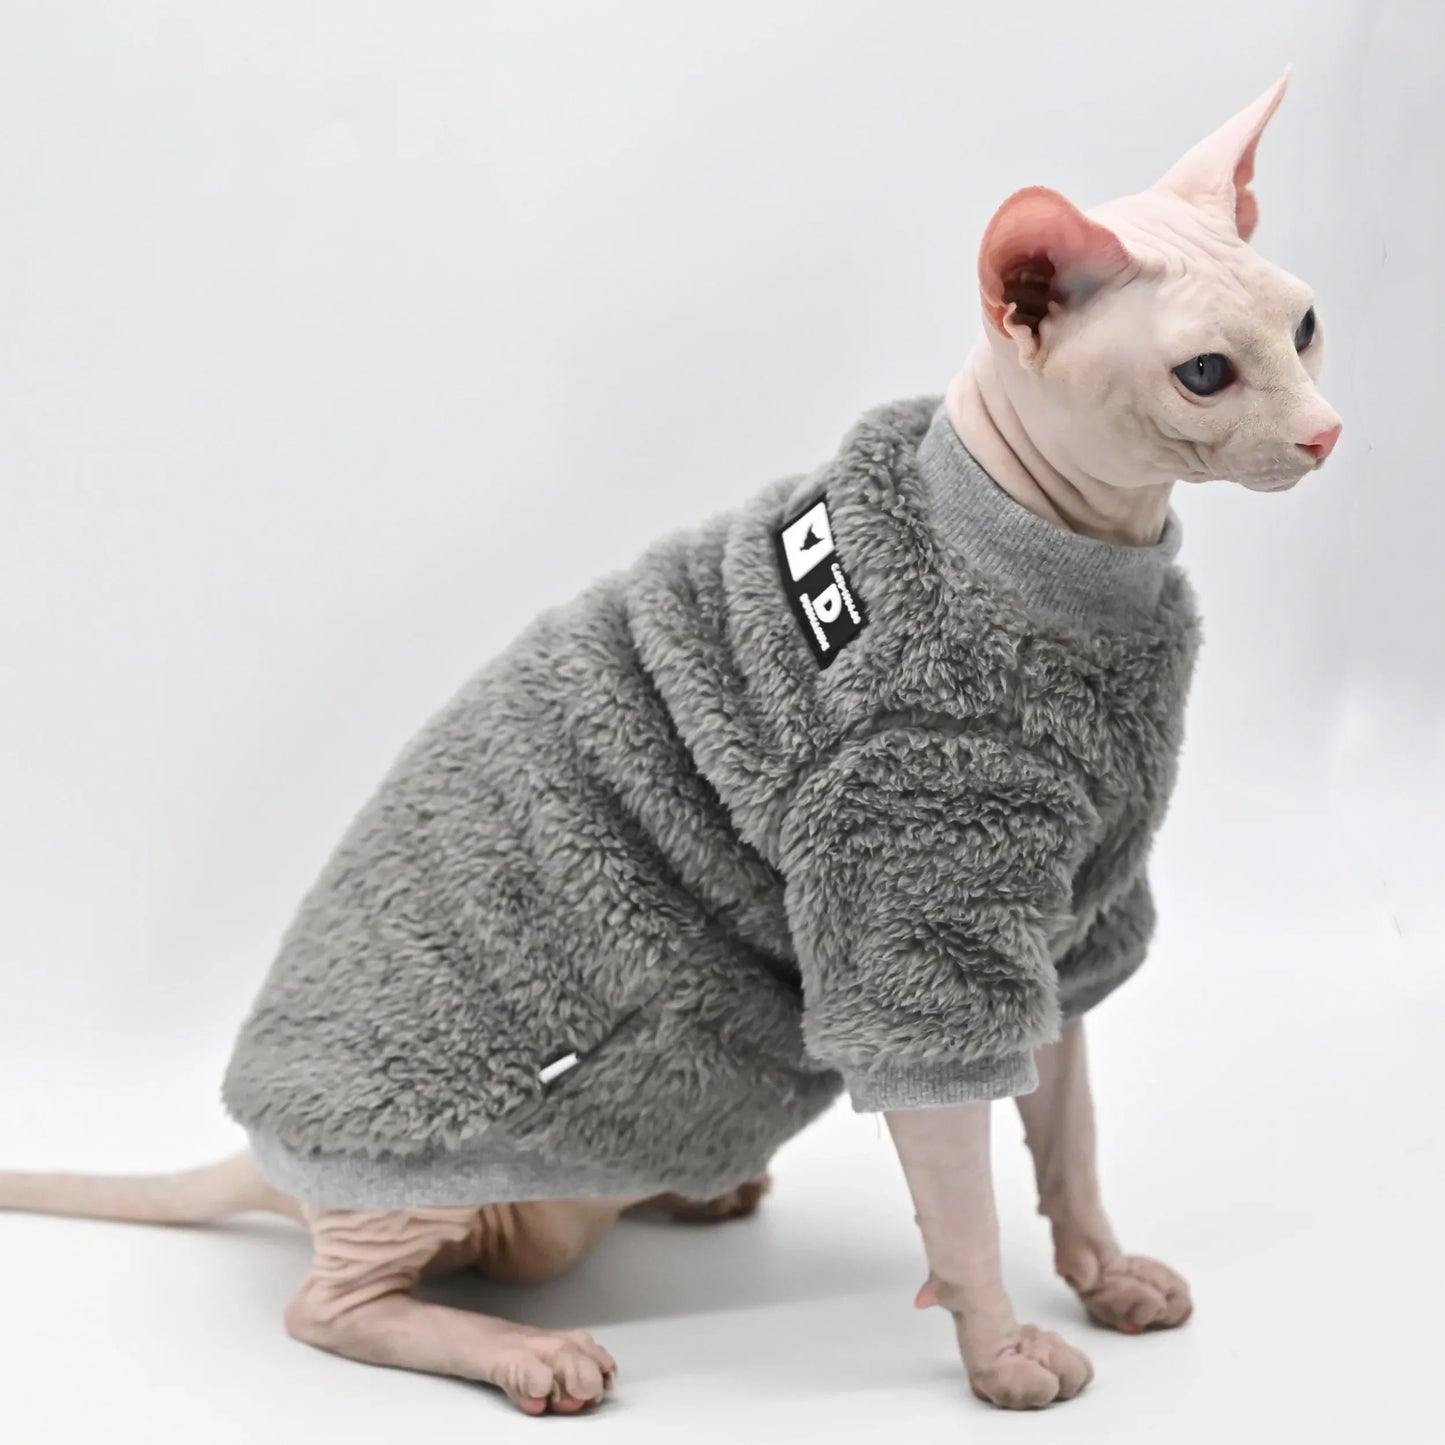 Warm & Stylish Sphynx Cat Cow-Style Sweater#AdorableCatClothes,#CatCowStyleSweater,#CatFashion,#CatsAccessories,#ComfortableCatSweater,#HairlessCatApparel,#PetAccessories,#PetSupplies,#SphynxCatSweater,#StylishCatSweater,#WarmCatClothing£18.9